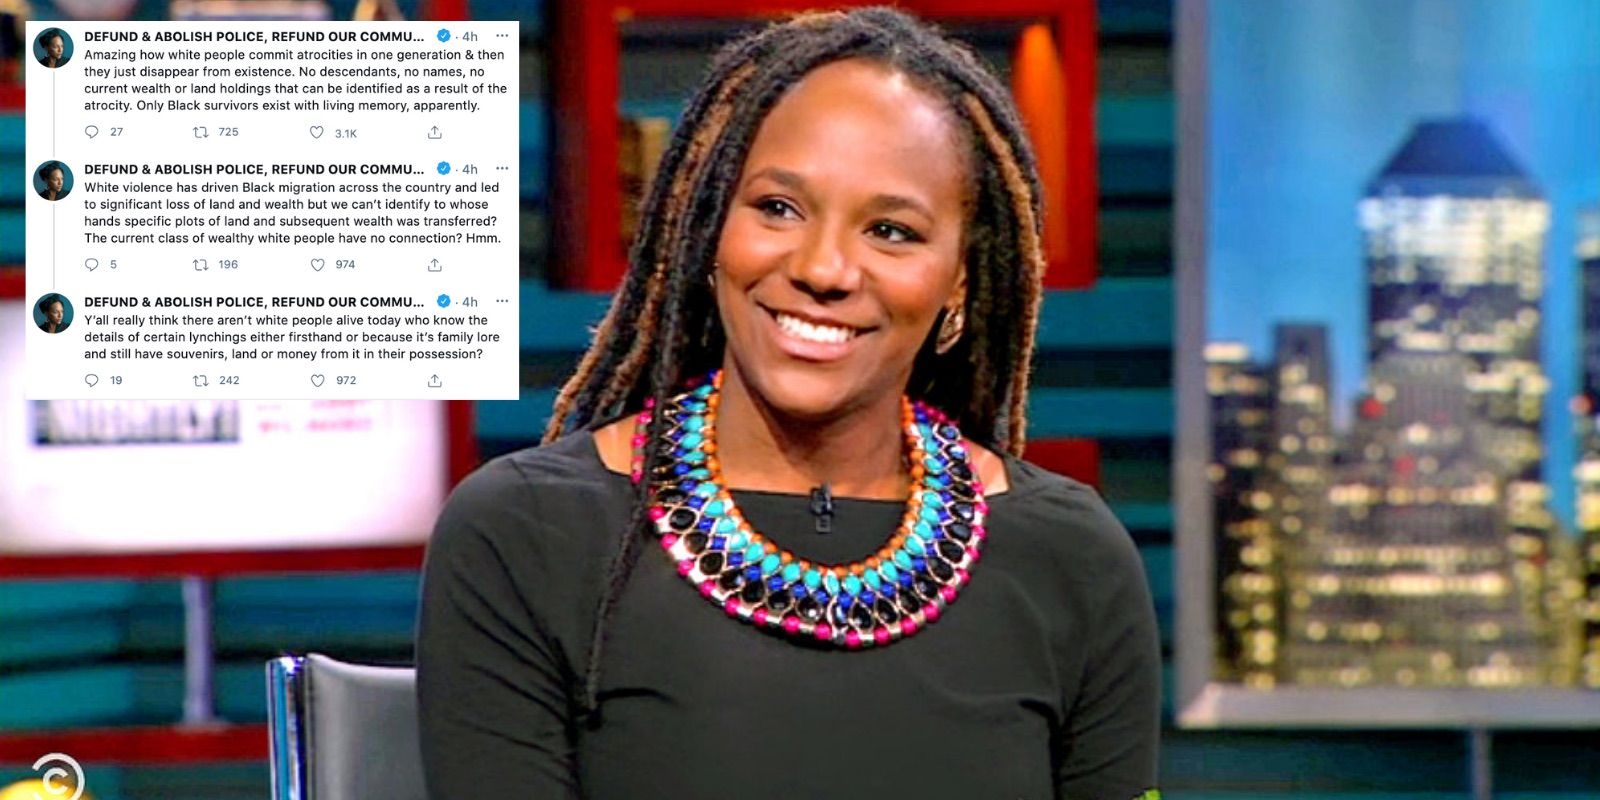 BLM activist Bree Newsome calls for land reapportionment as part of reparations